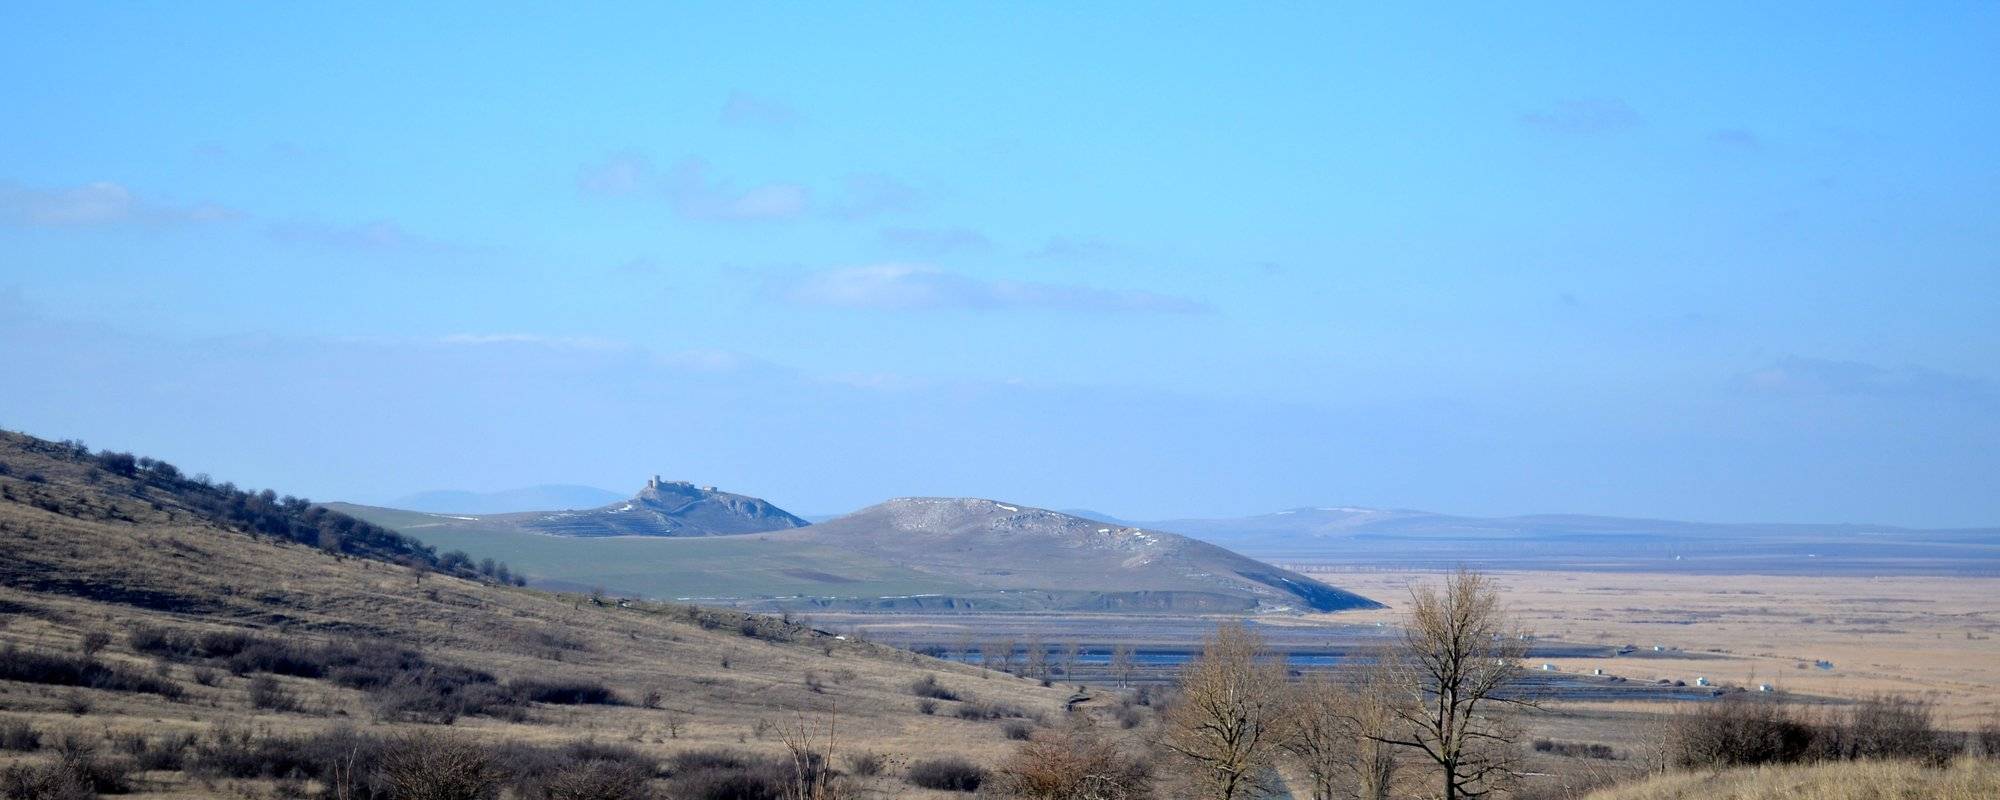 ENISALA GENOESE FORTRESS, AN UNDEREXPLOITED ATTRACTION OF DOBROGEA COUNTY, ROMANIA